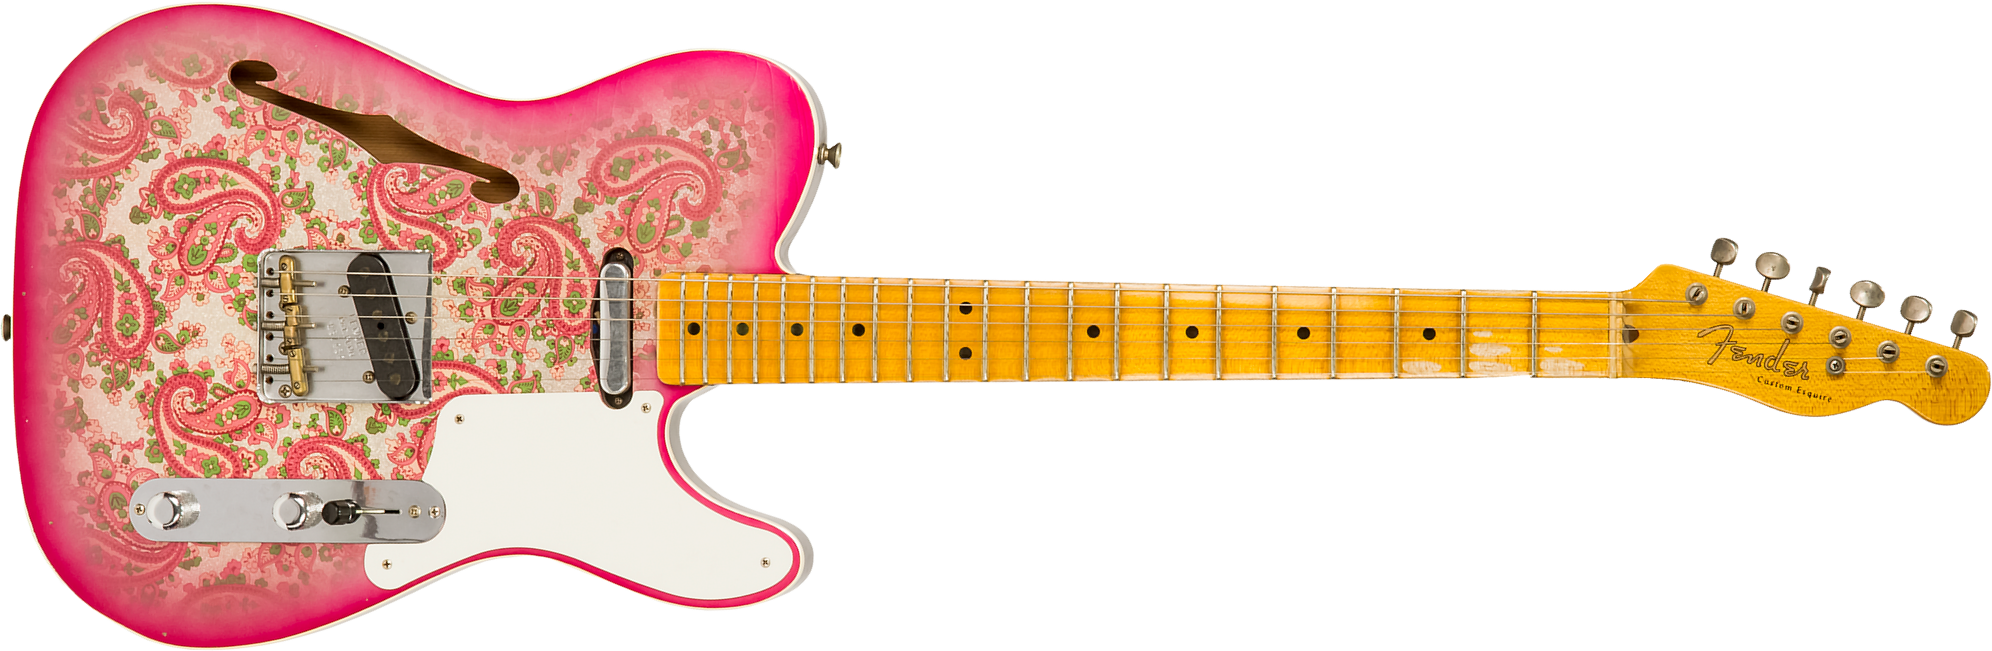 Fender Custom Shop Double Esquire/tele Custom 2s Ht Mn #r97434 - Journeyman Relic Aged Pink Paisley - Semi-hollow electric guitar - Main picture